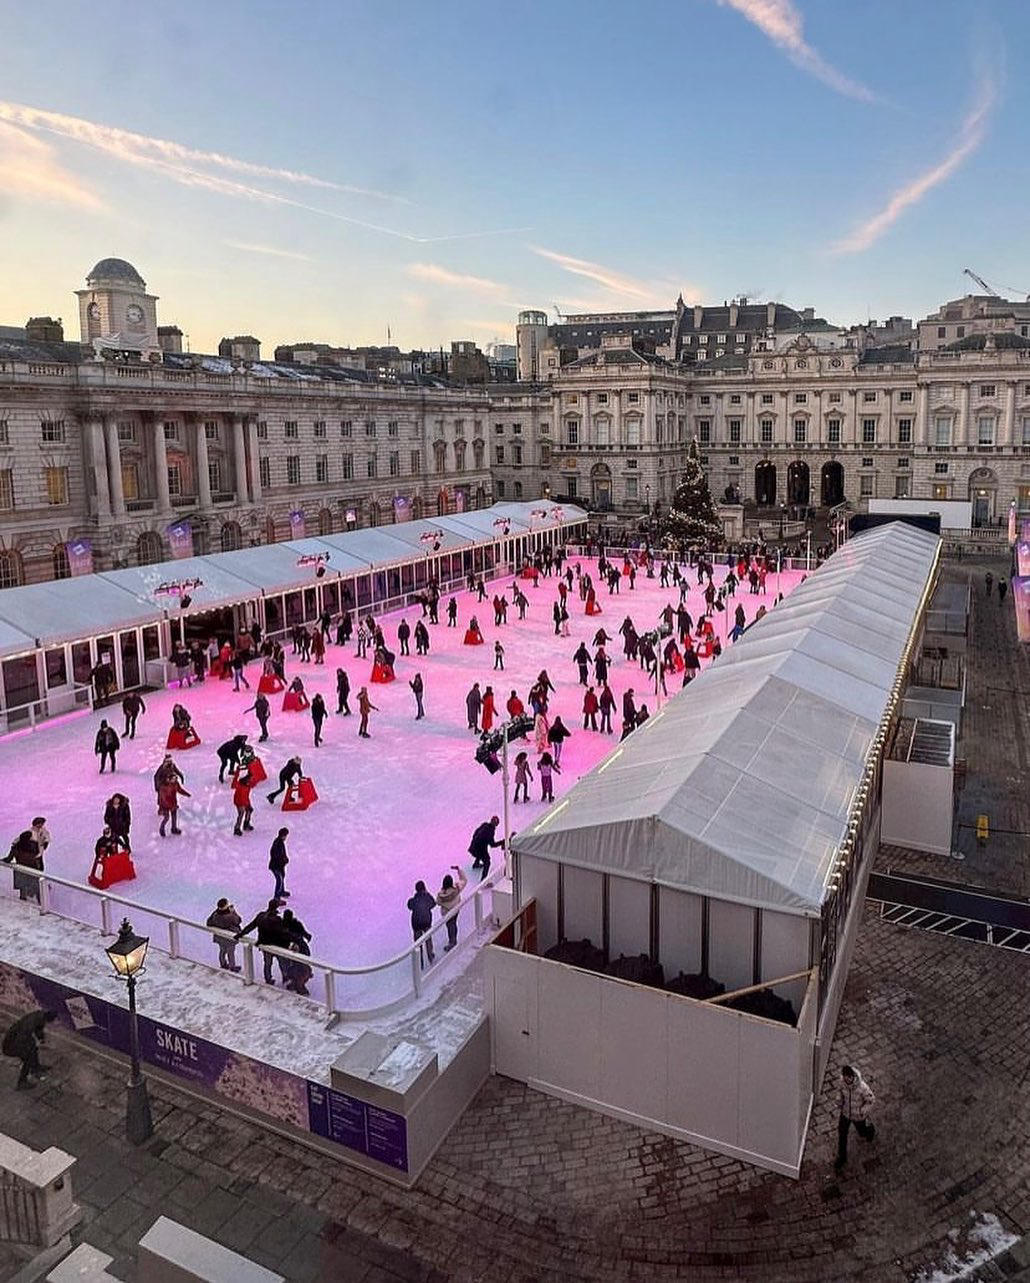 image  1 VISIT LONDON - There’s still time to get your skate on